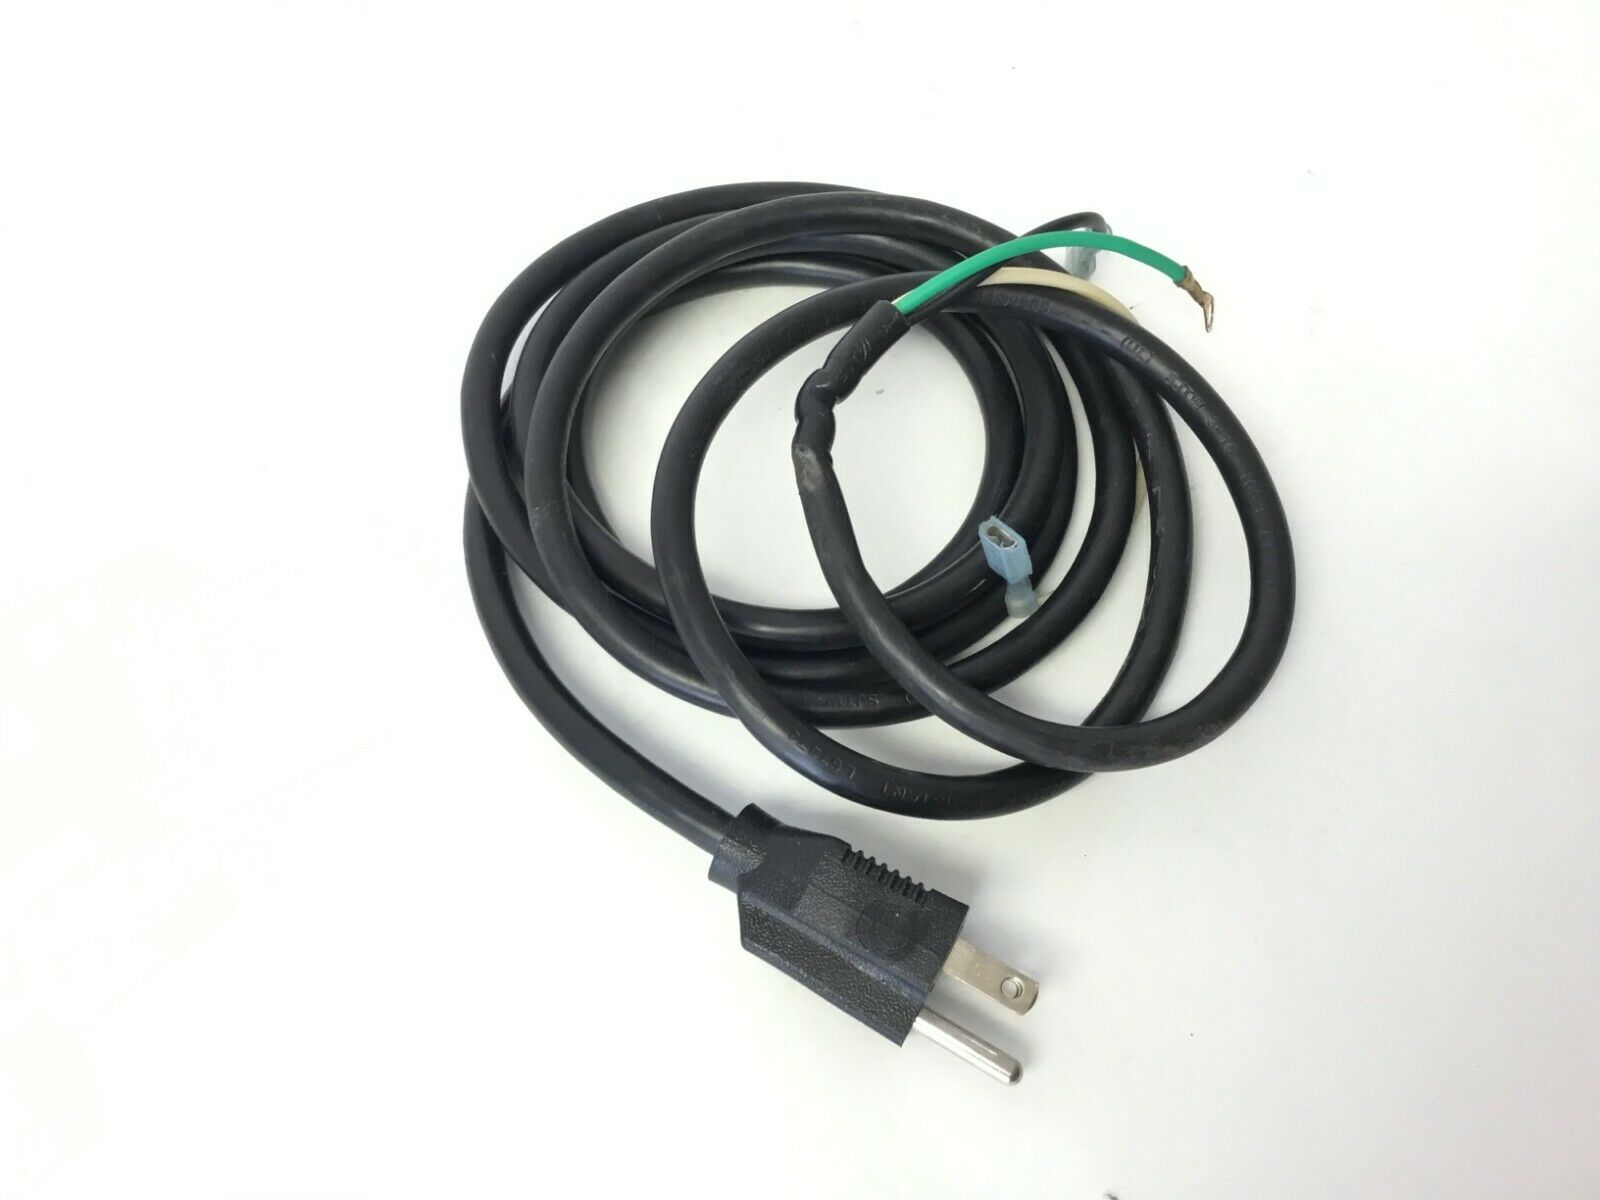 Power Cord (Used)